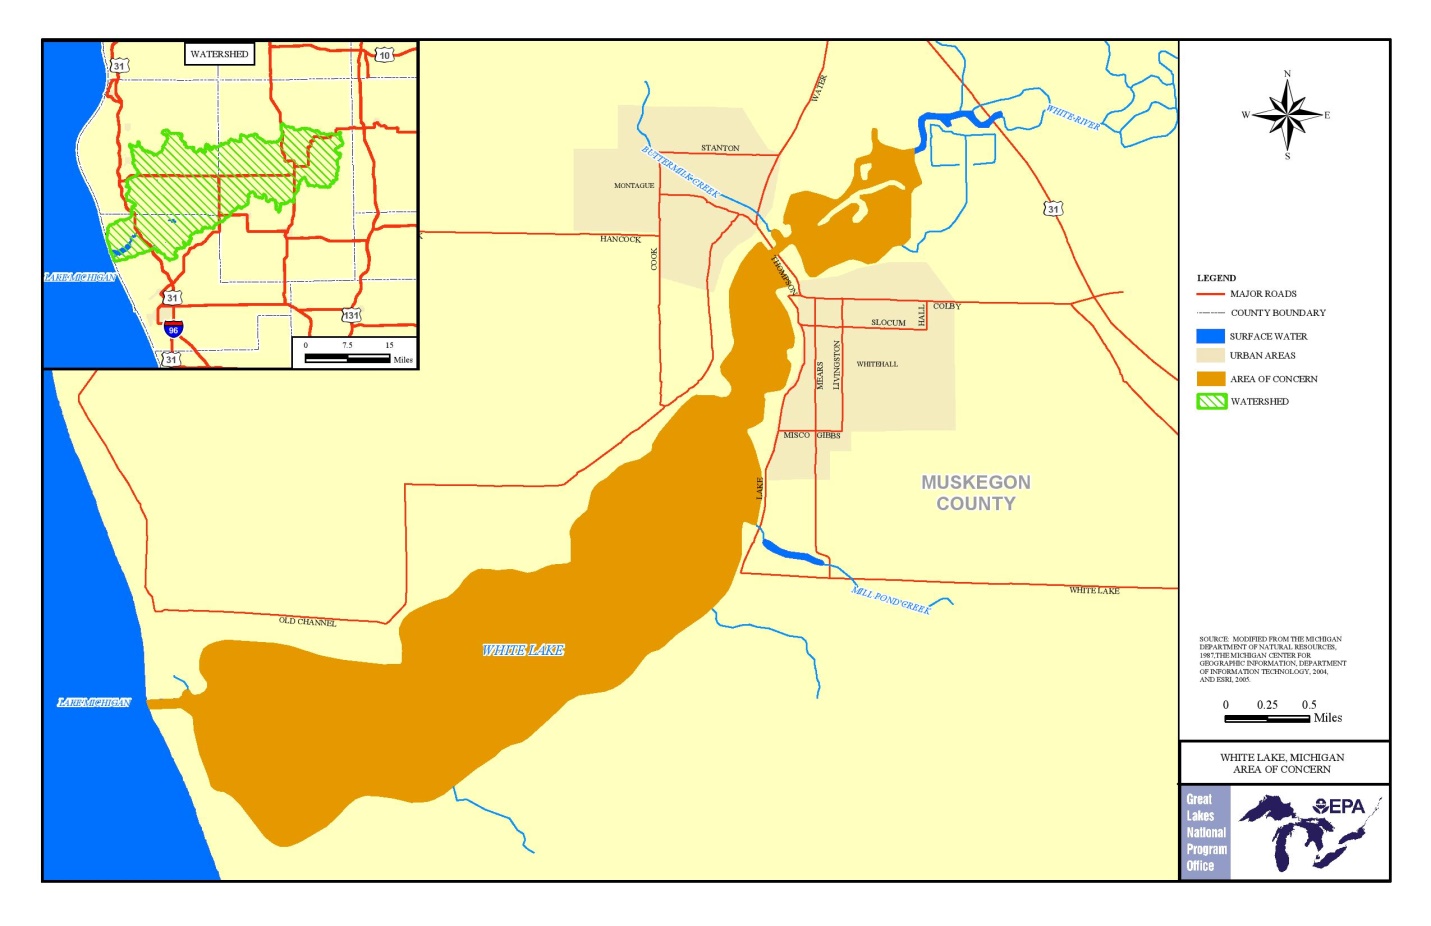 The boundaries of the White Lake Area of Concern. Credit: EPA.